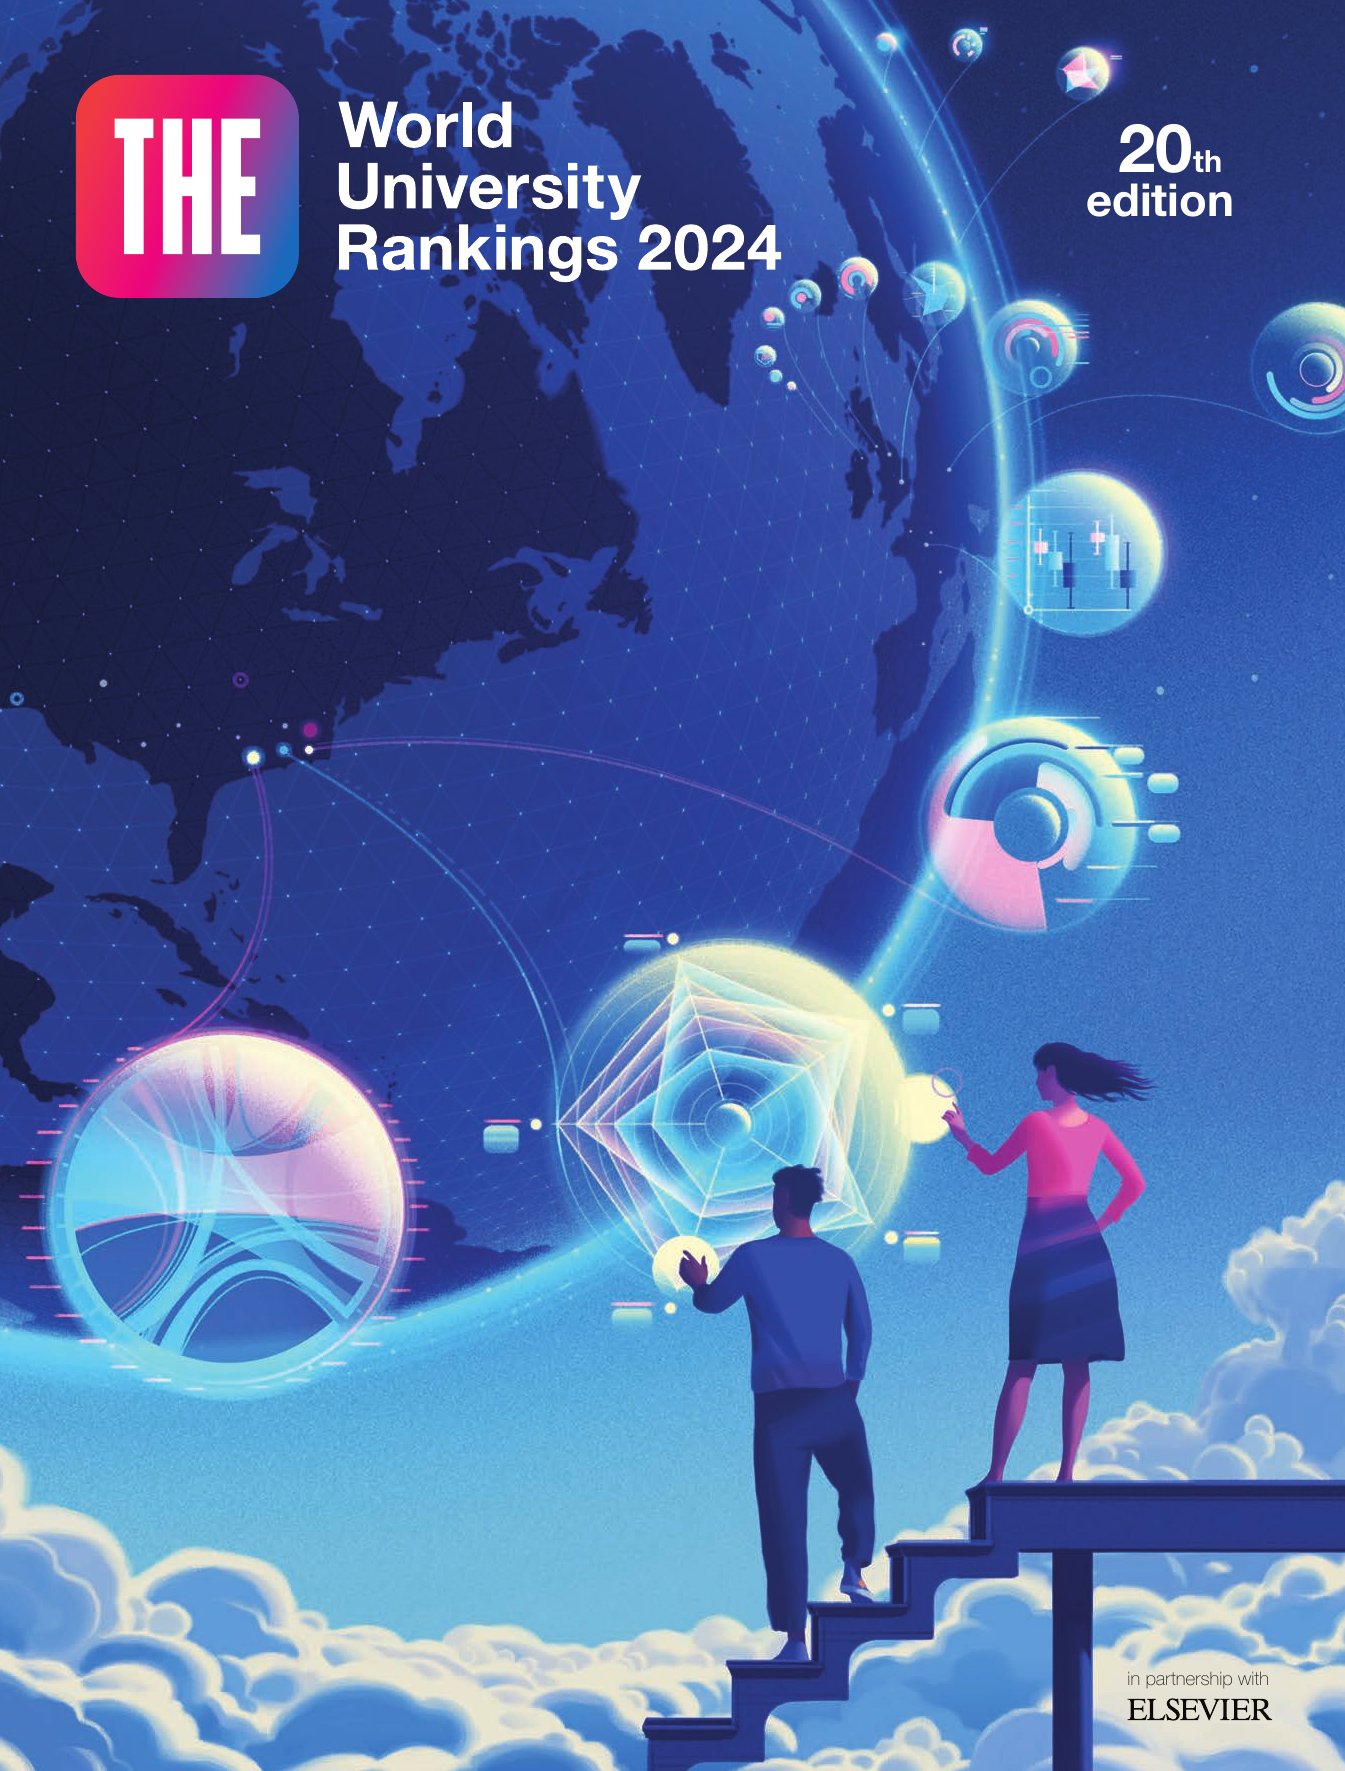 MPU’s interview is on Times Higher Education World University Rankings Publication